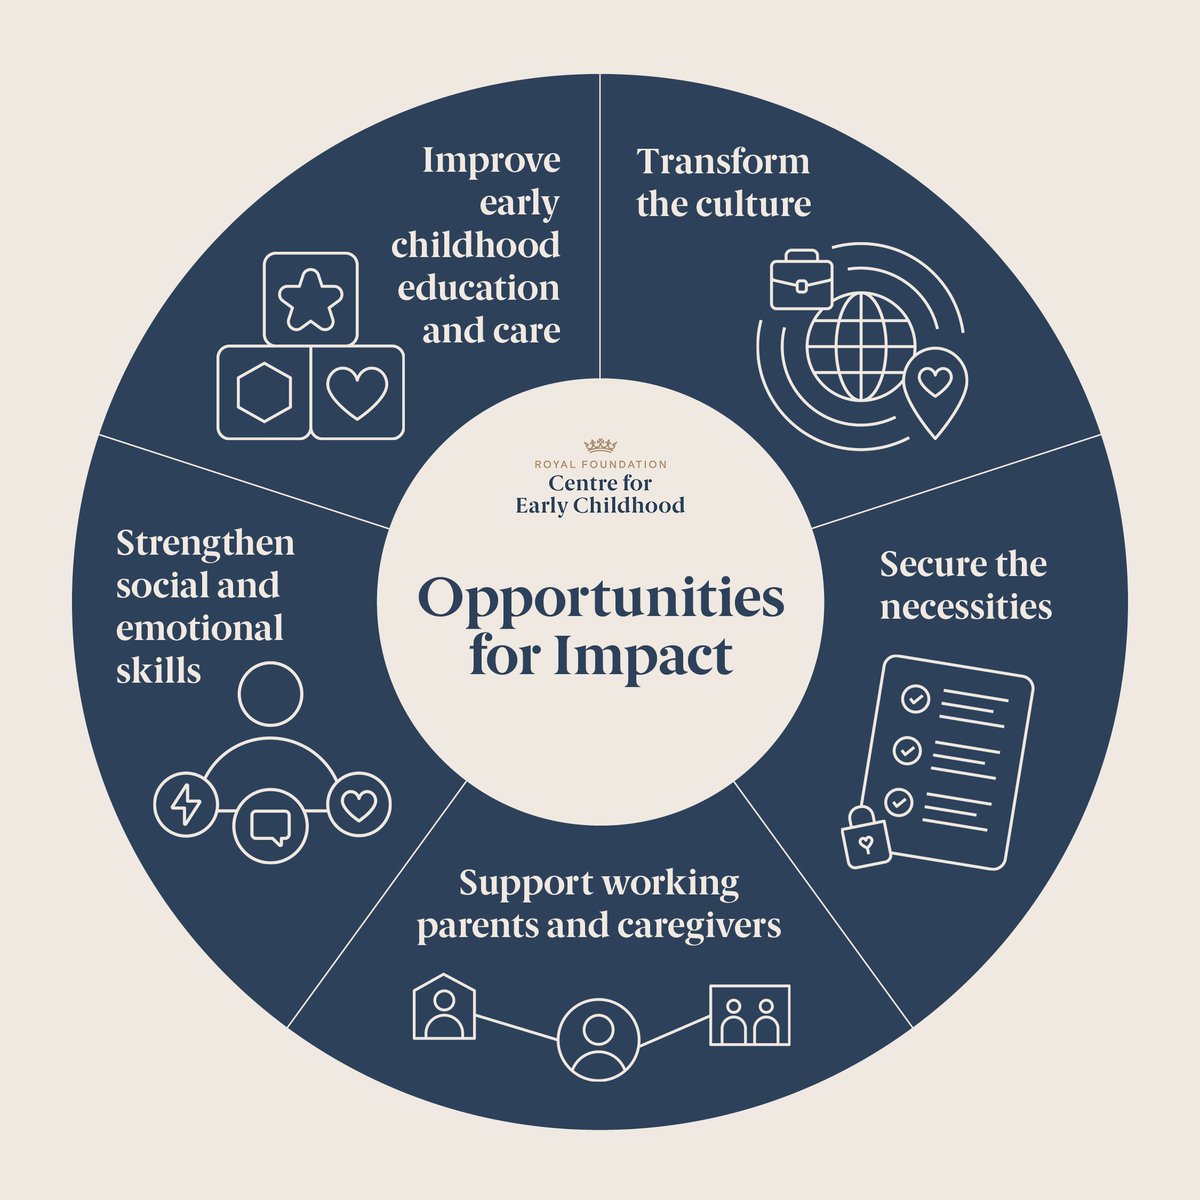 Whether it's helping families access support they need, prioritising social and emotional well-being of children and the adults in their lives, or creating a culture that prioritises early childhood, your business can make an impact: …inesscase.centreforearlychildhood.org/get-involved/ #CaseForEarlychildhood